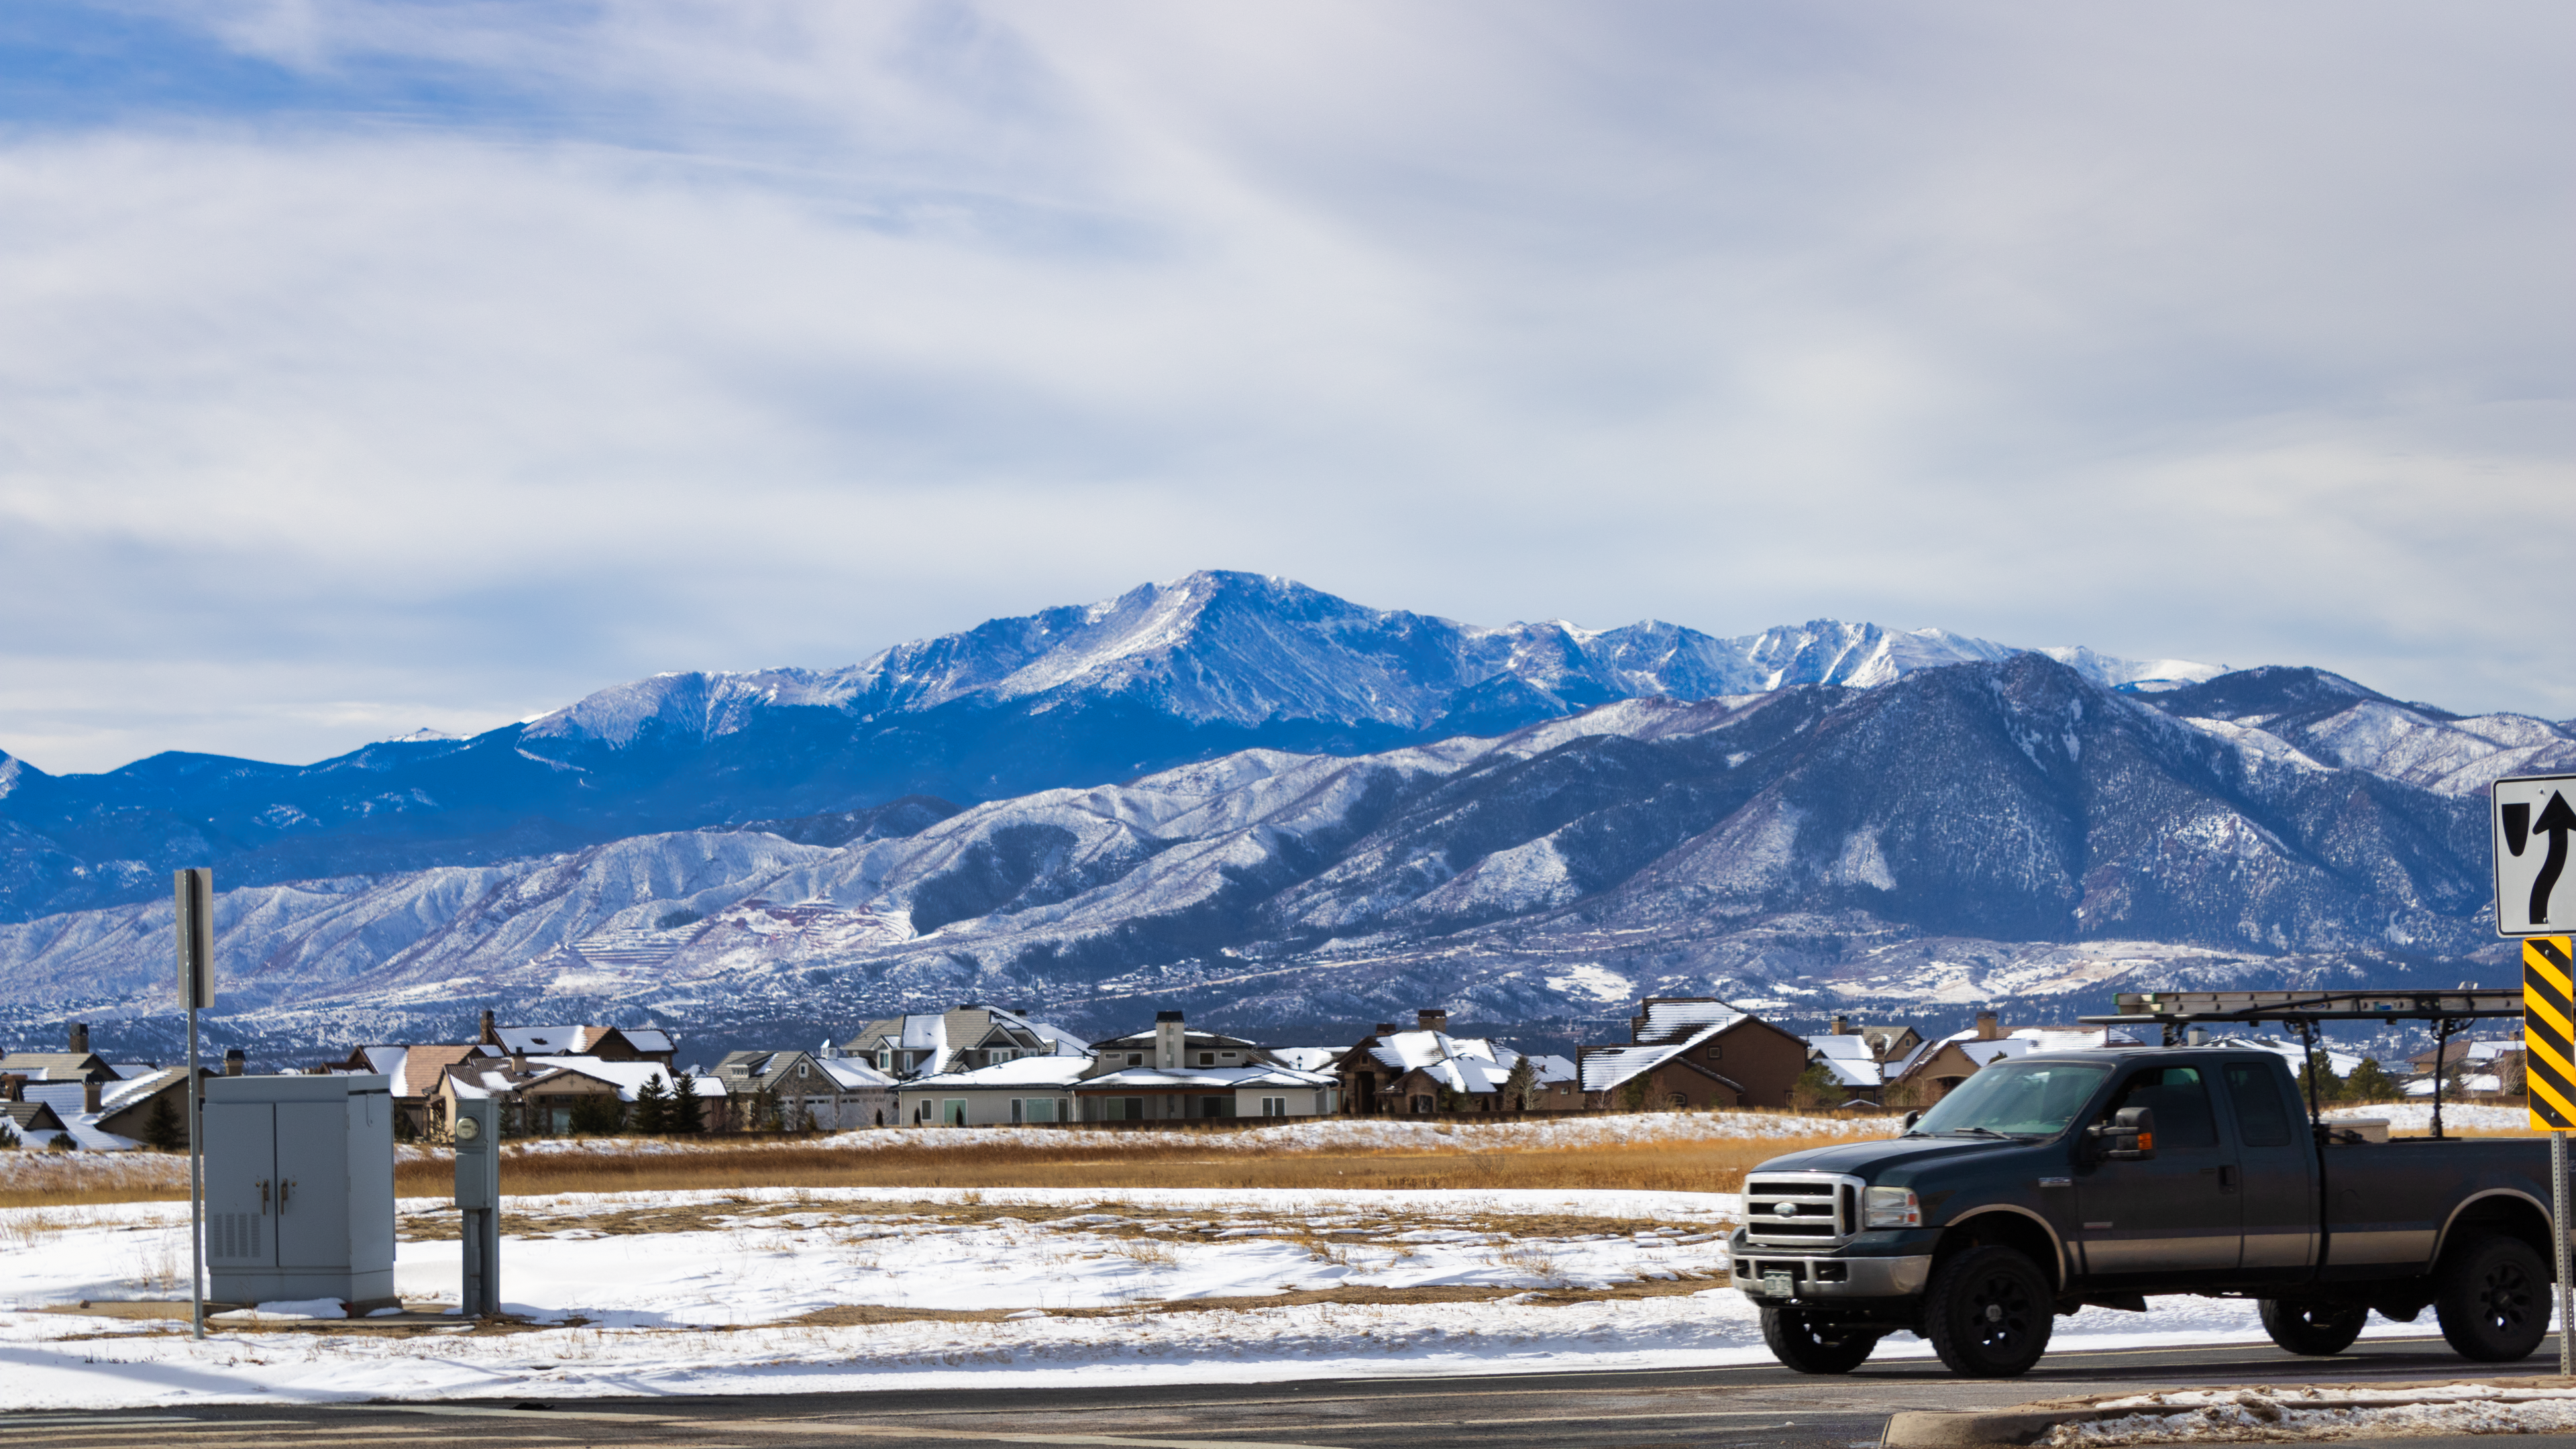 Colorado Mountain Top Landscape Truck Snow Nature Photography Ford Ford F 250 3840x2160